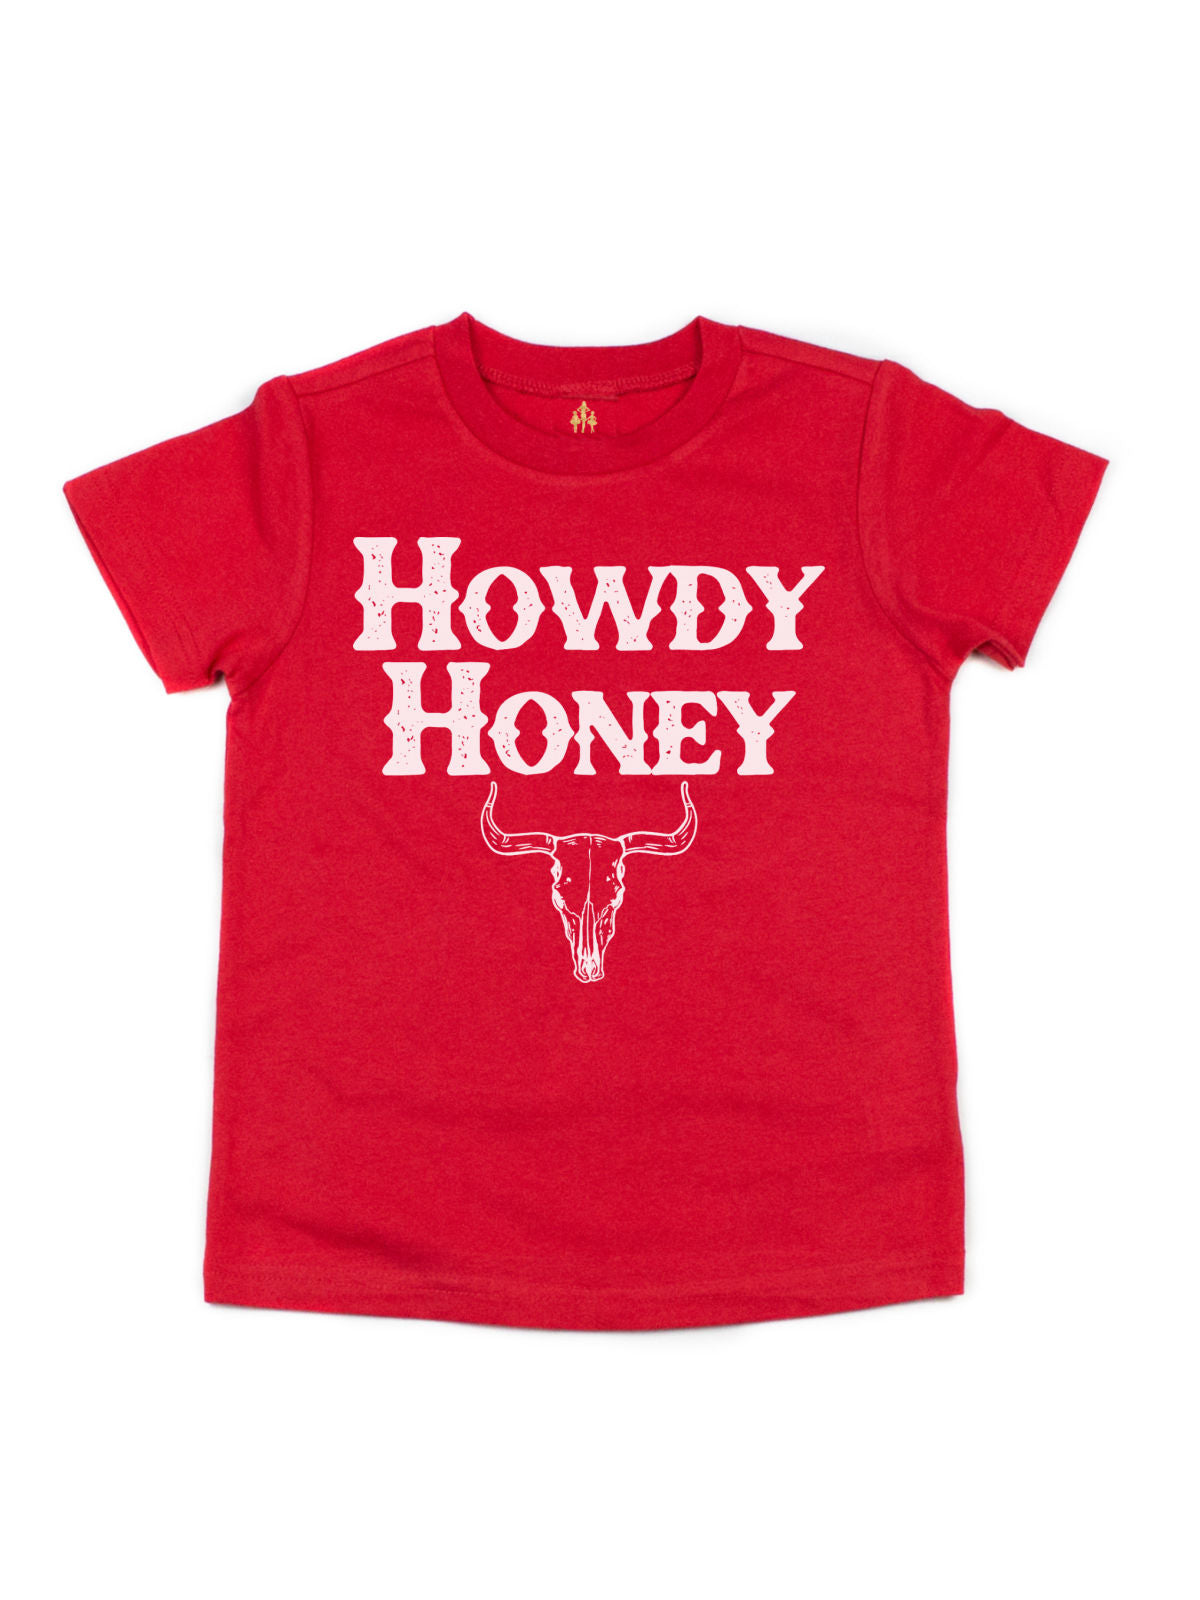 Howdy Honey Kids Country Shirt in Red